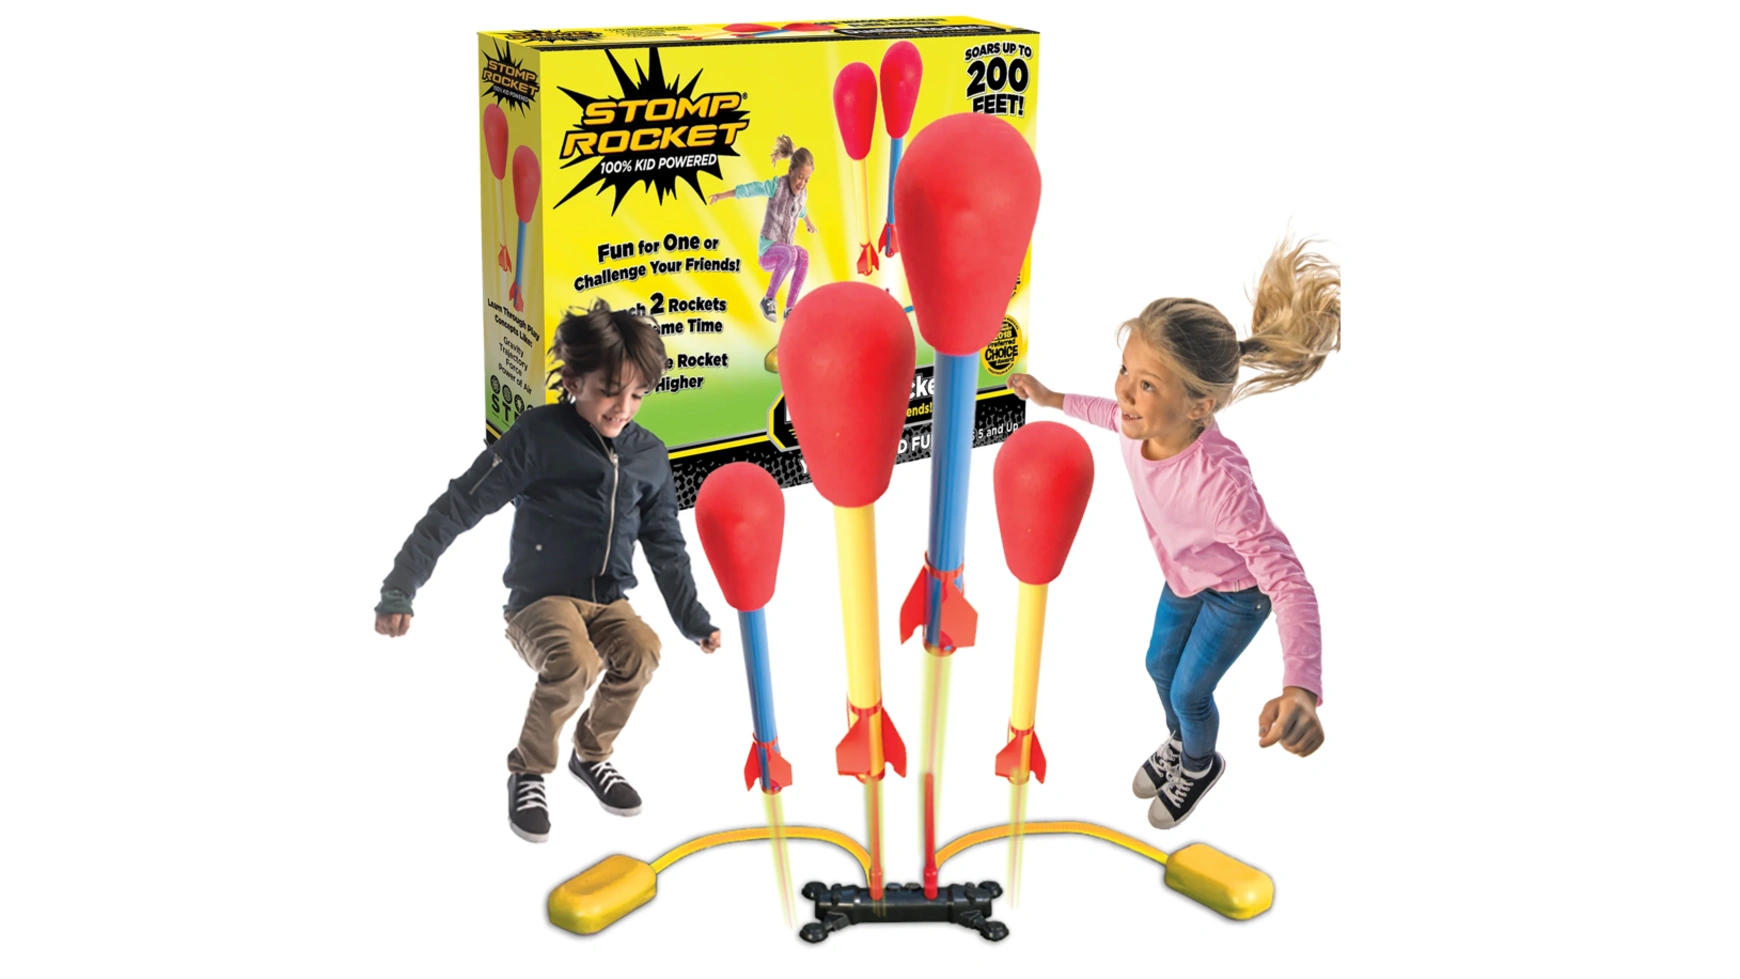 Stomp Rocket Дуэль air power stomp rocket launcher toys famous game outdoor games sport toy fly shining led light rocket adjustable super stable